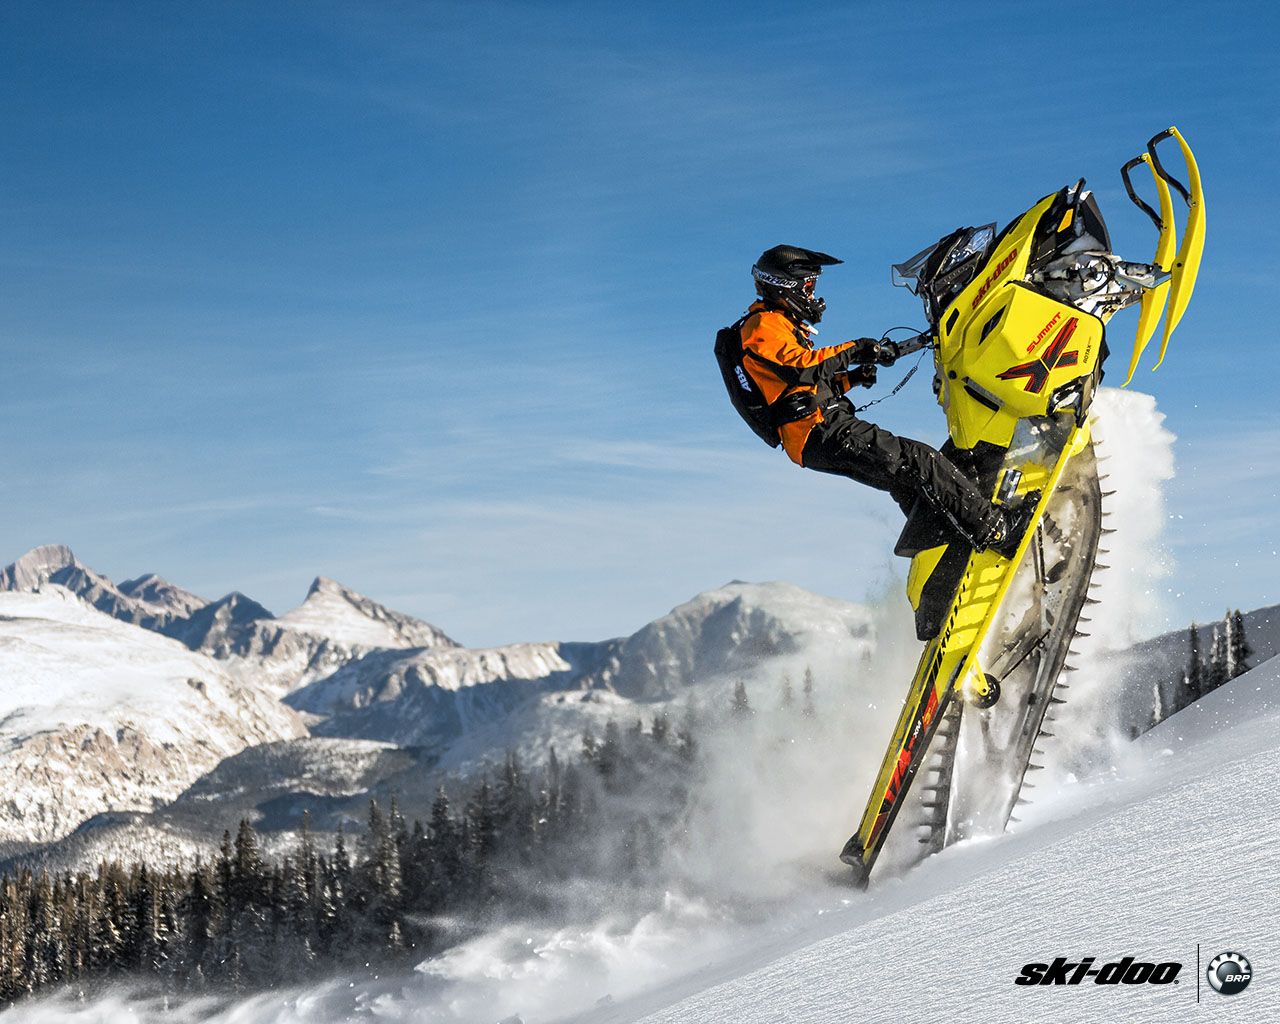 2015 Ski-Doo Summit X with T3 package (174) | Action